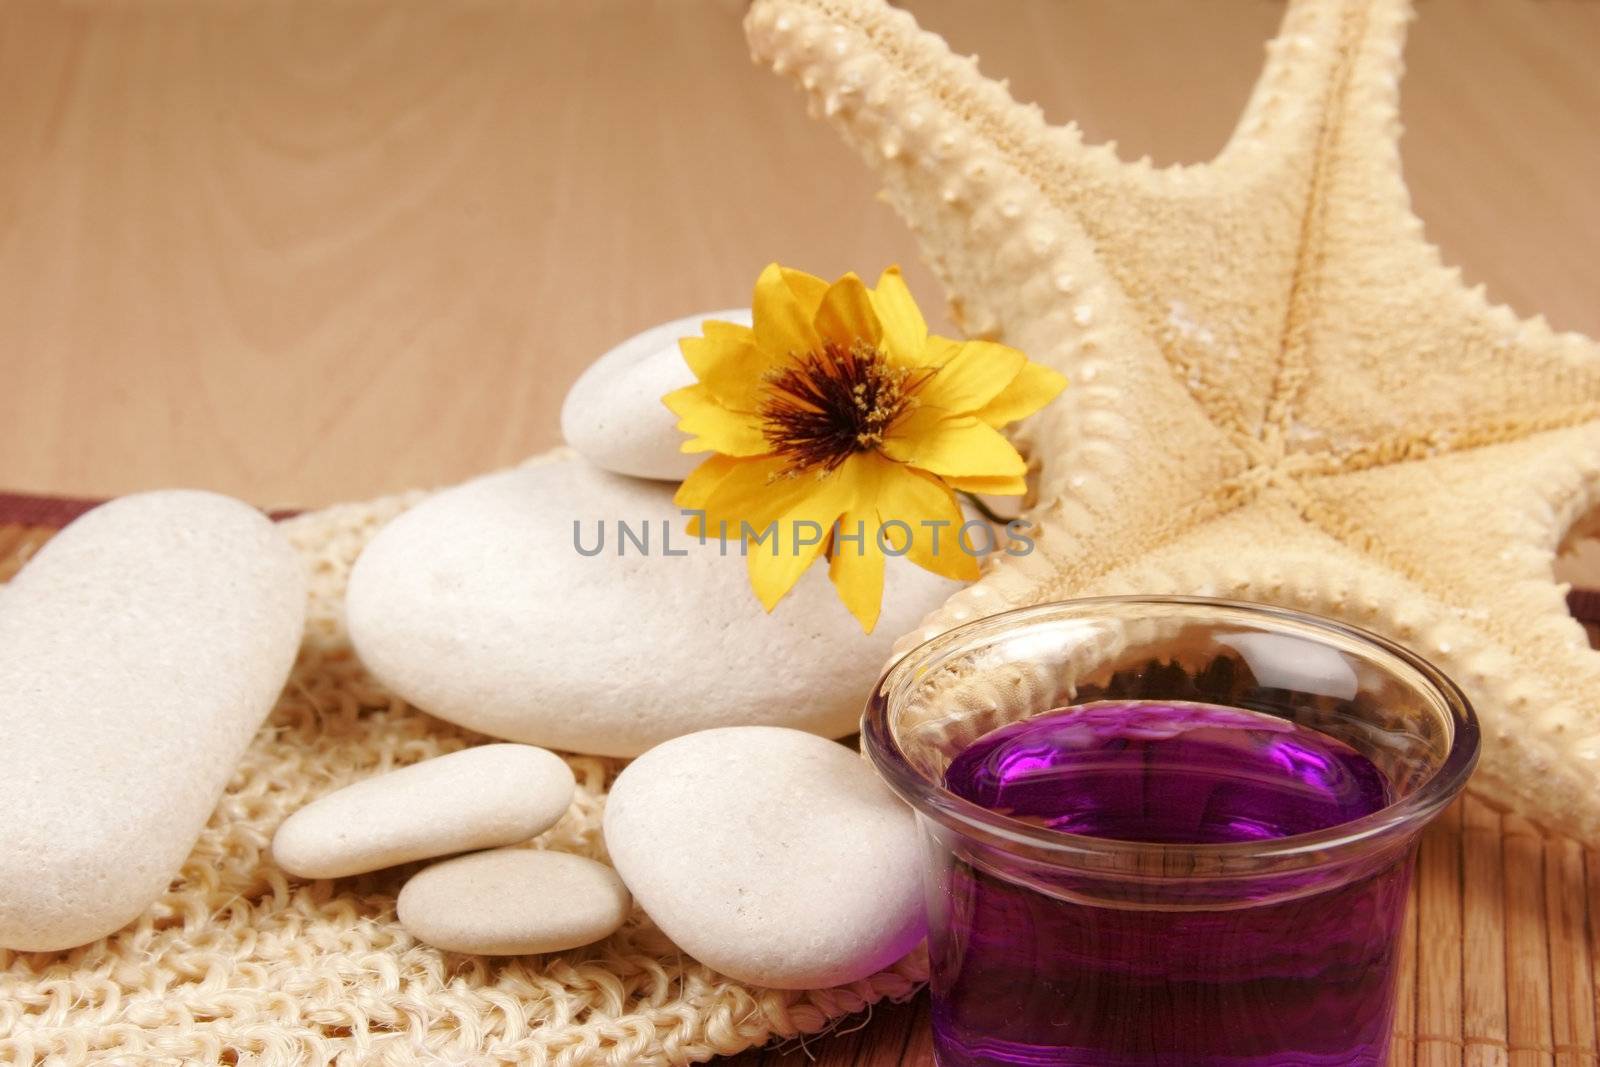 Spa still-life with star fish, stones, flower and aroma therapy bottle